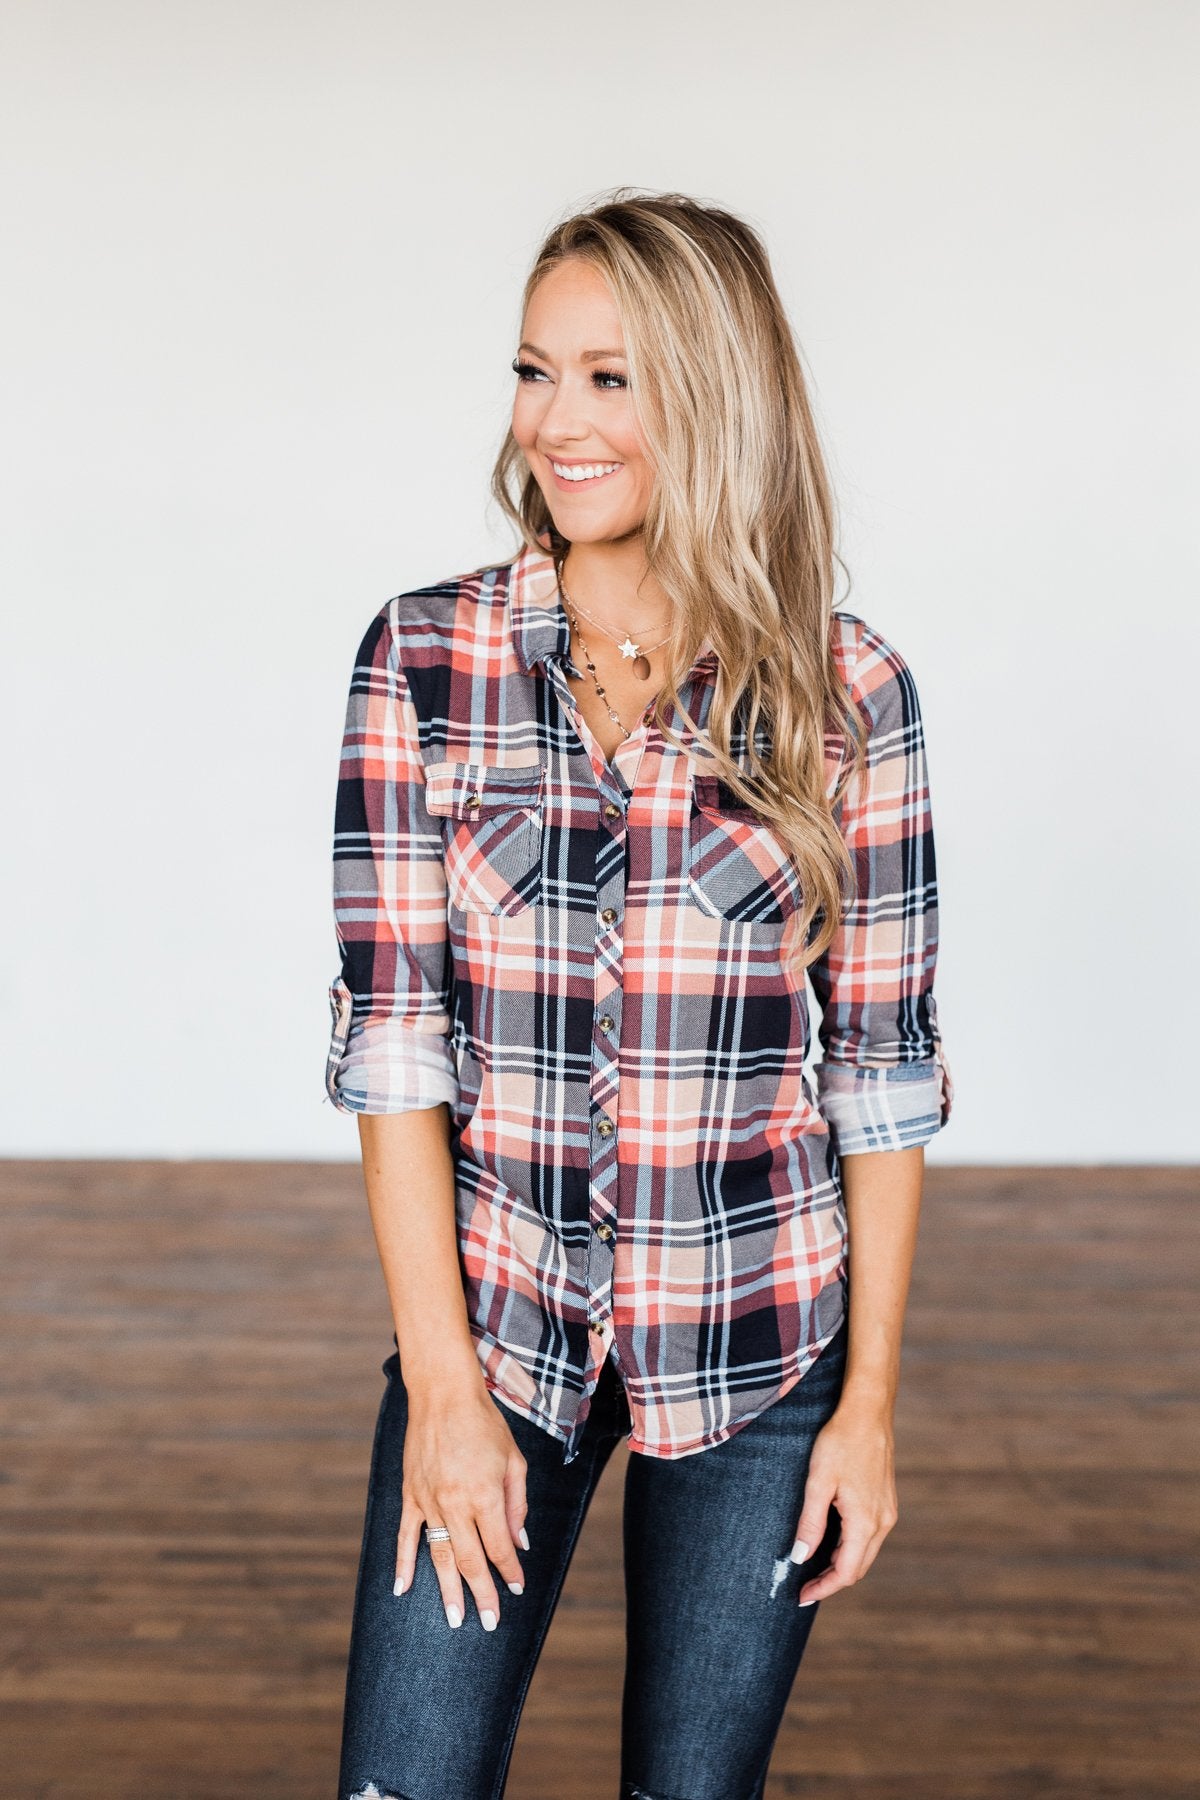 Fall Into The Night Plaid Button Top- Navy, Coral, Tan